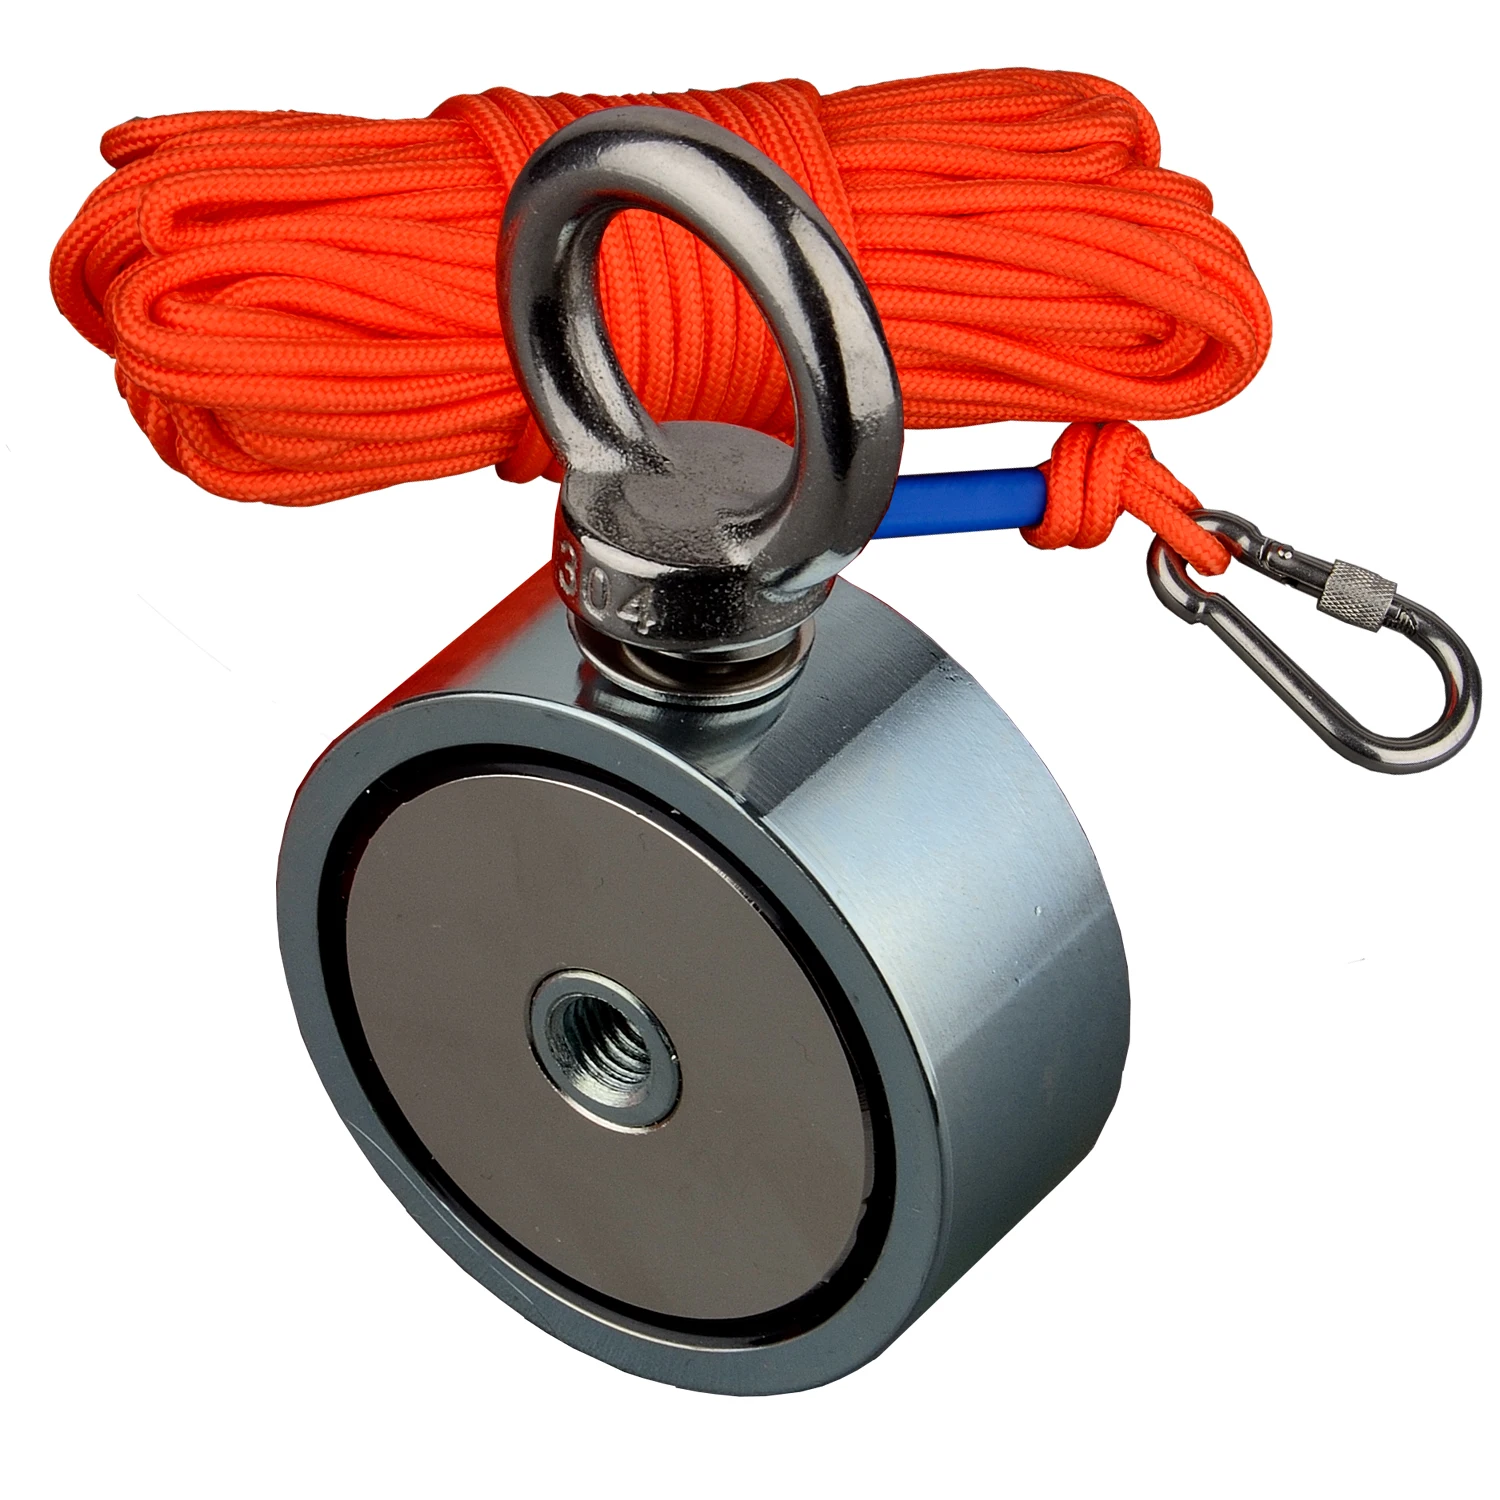 200KG 300KG Double side Neodymium Magnet Fishing Rope Salvage Searching Detecting Recovery Metal Treasure Finder